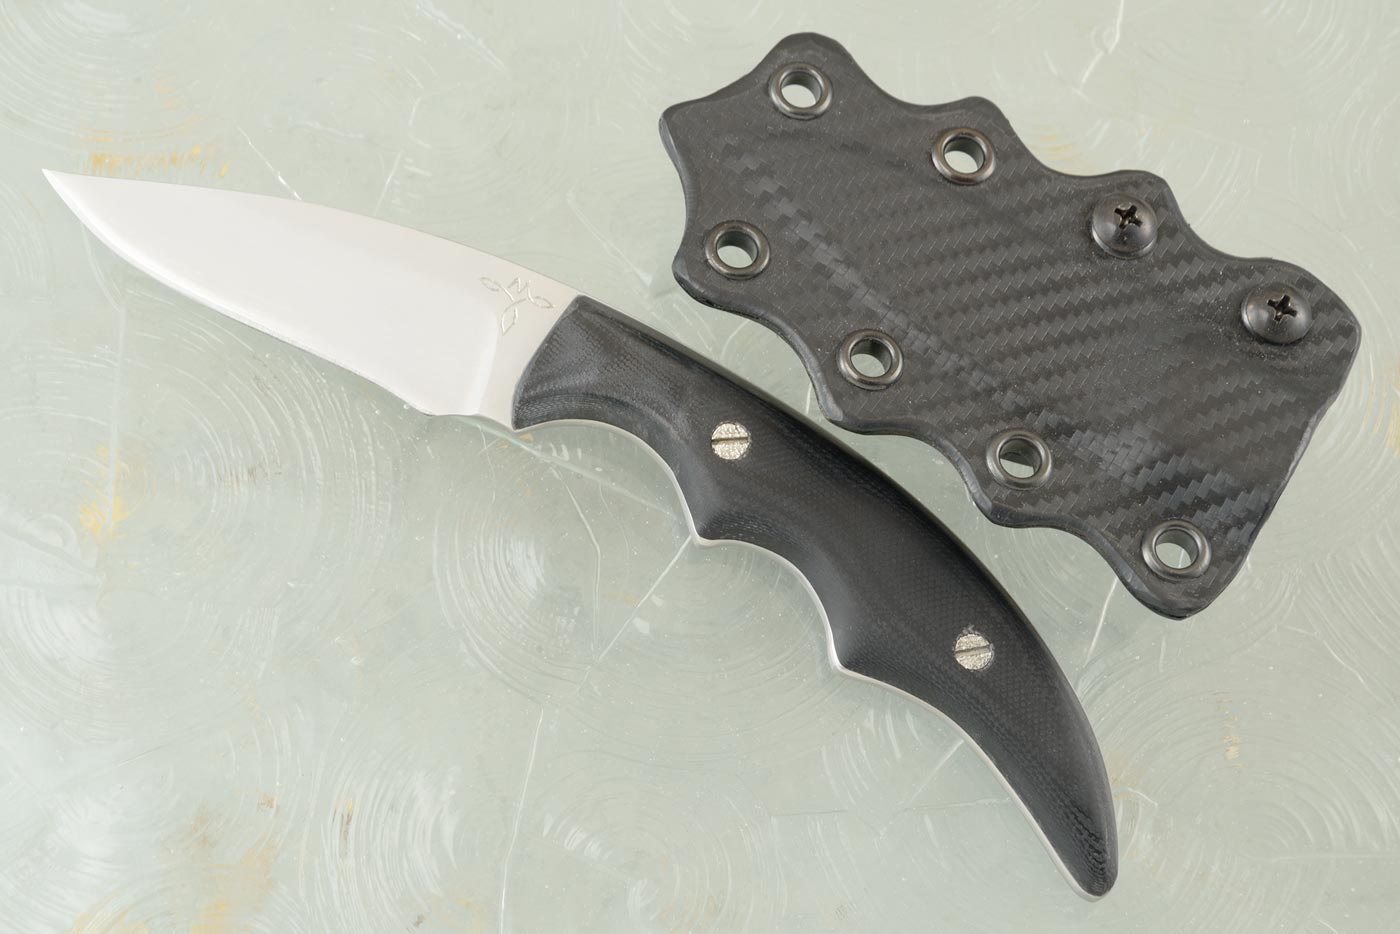 Batwing Utility with Black G10